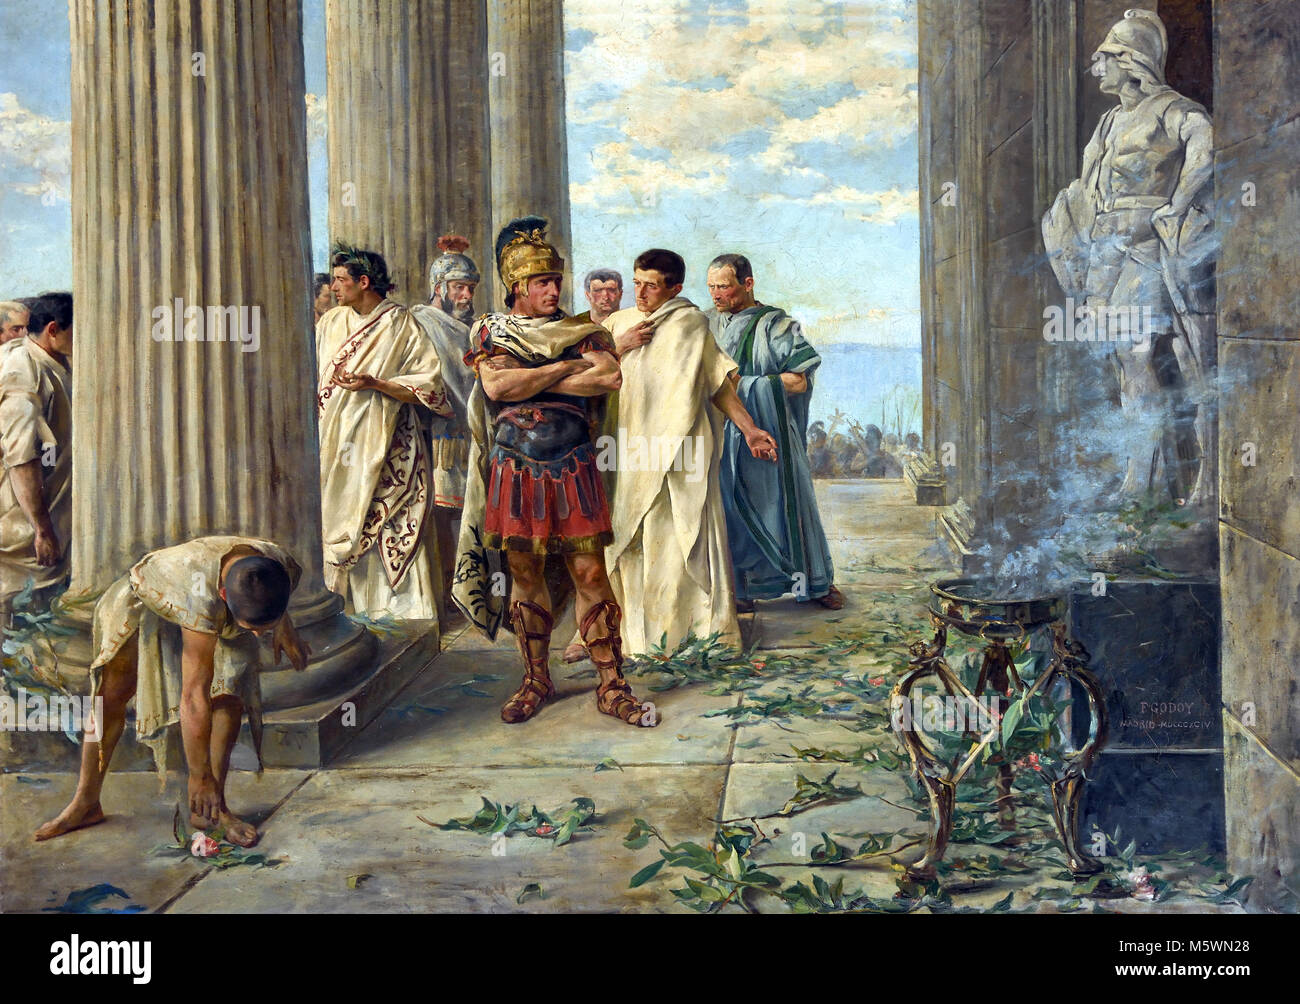 Visit by emperor Julius Caesar to the famous temple of Hercules Gaditano.) Federico Godoy Castro (1869-1939).  ( This painting by Federico Godoy ( Spanish ),1894, recreates a visit by Julius Caesar  to the famous temple of Hercules Gaditano.) Italy,Italian Stock Photo